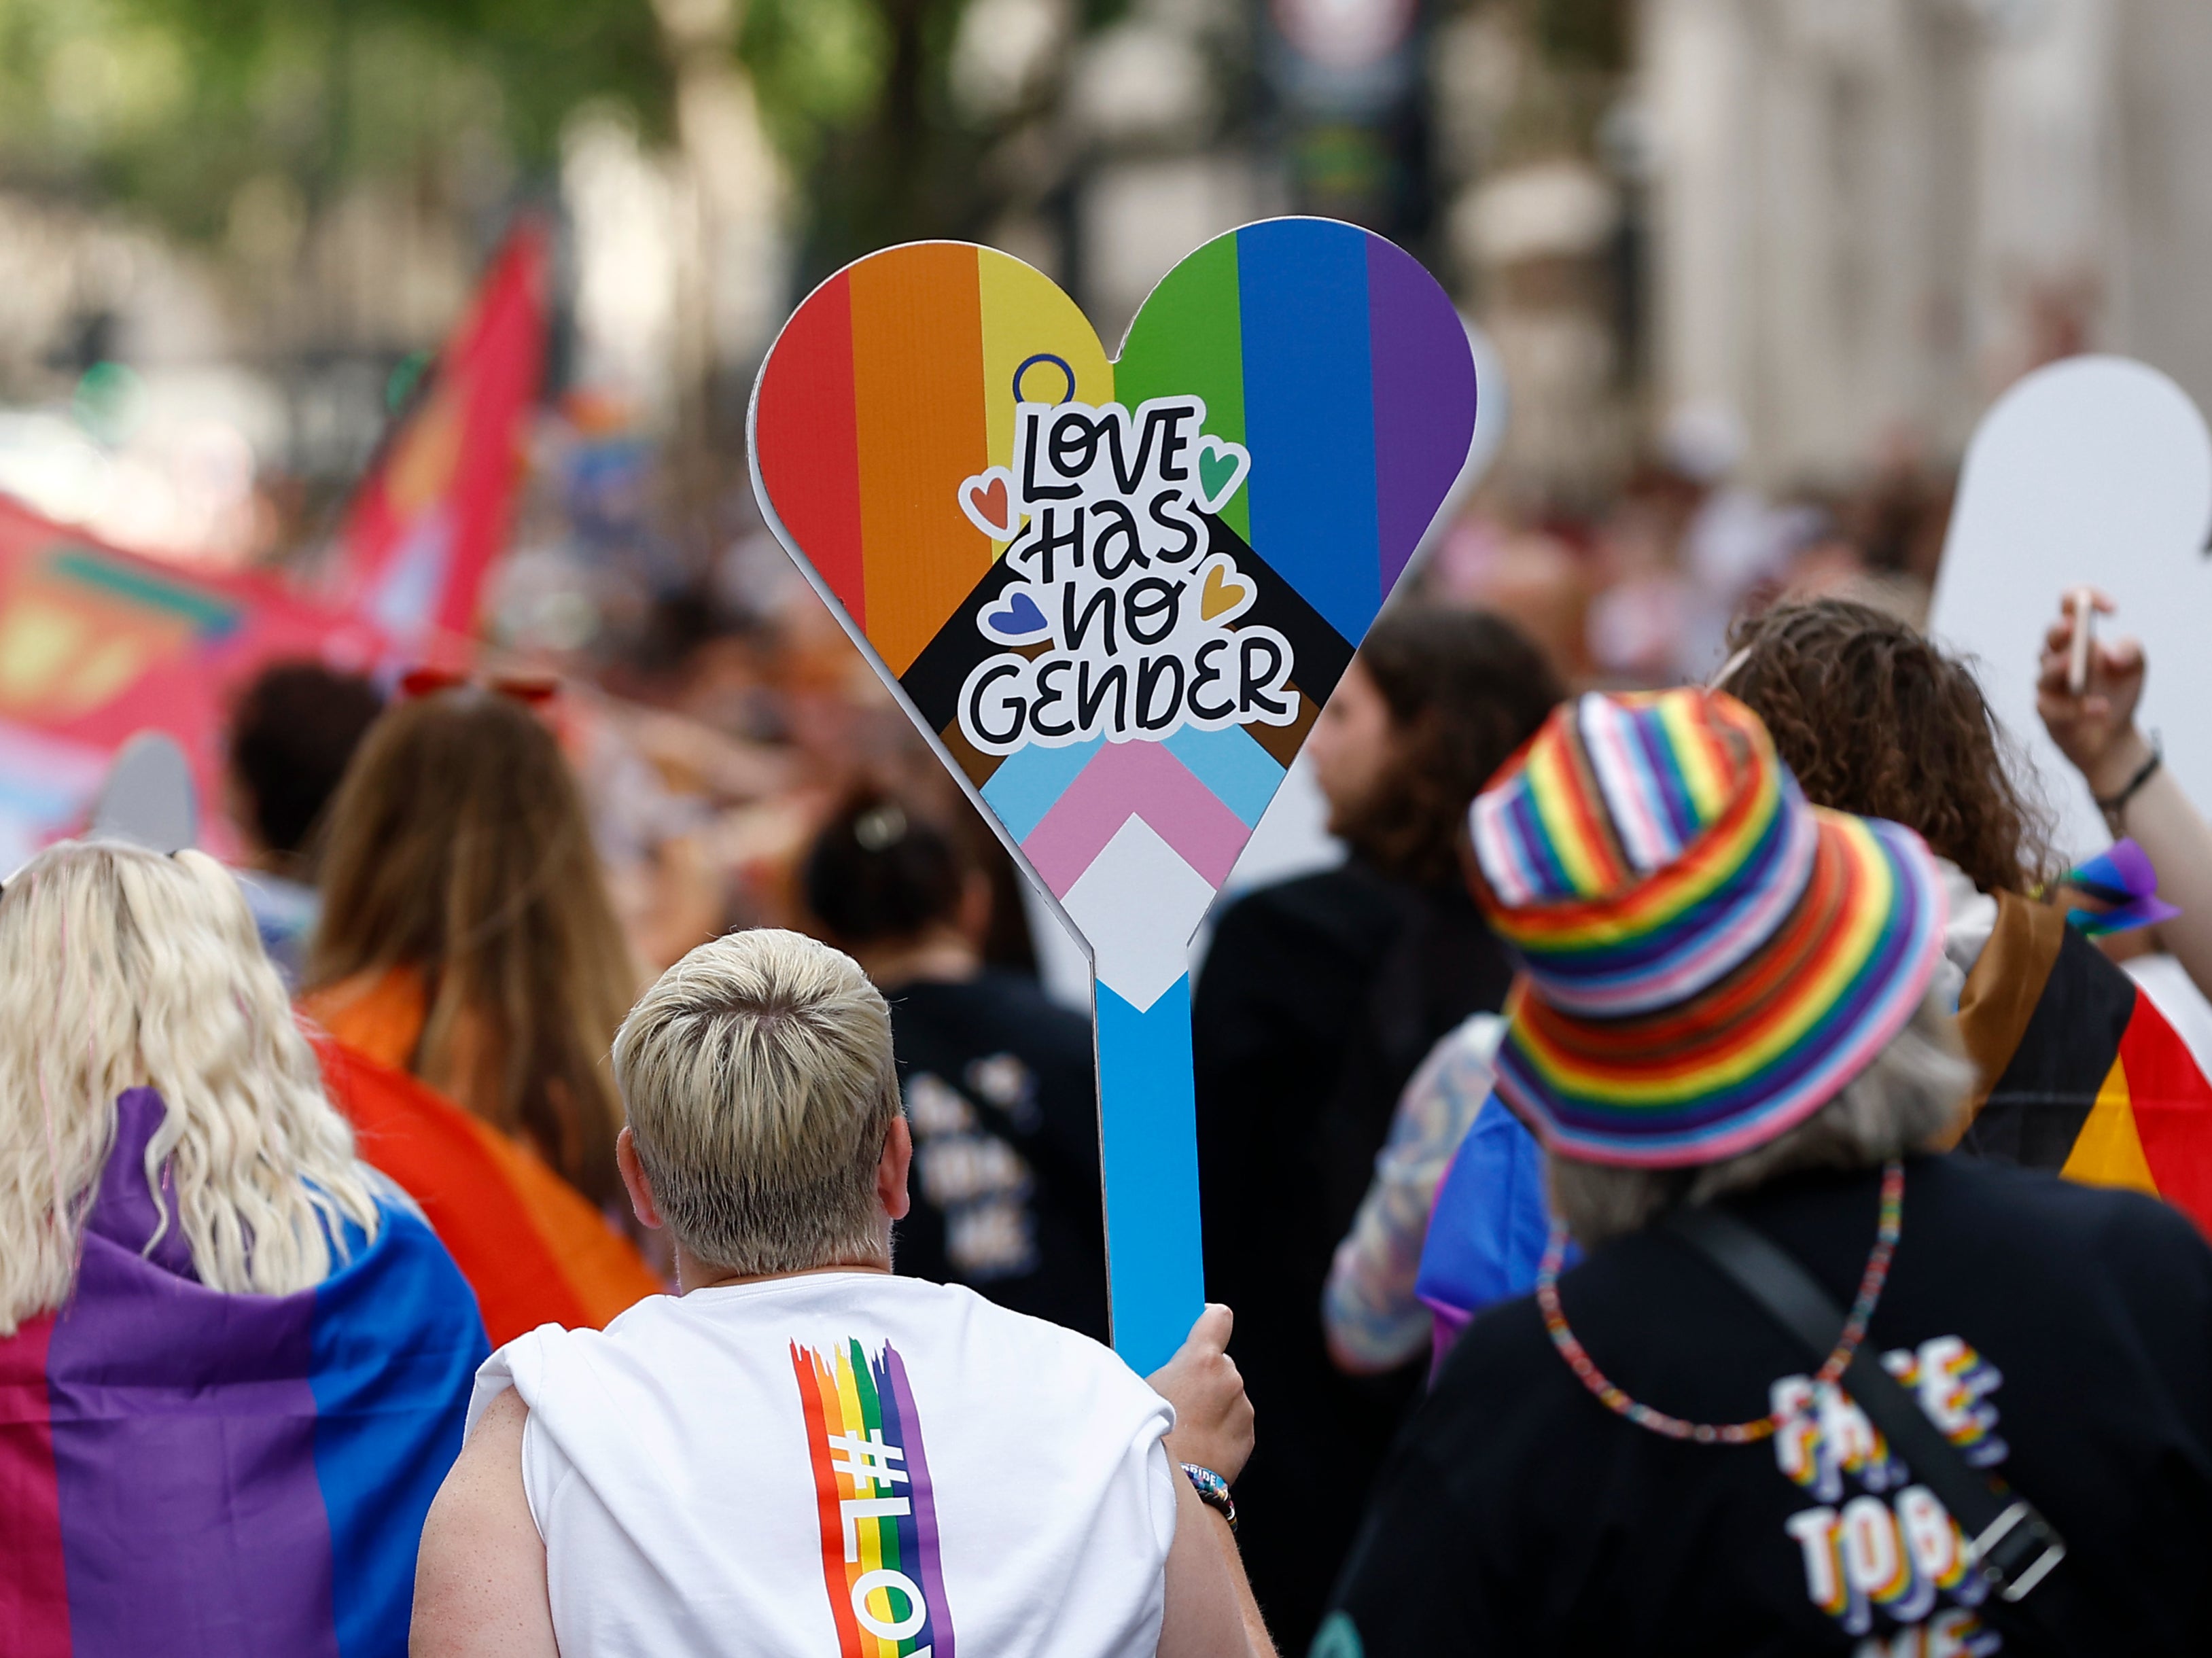 Parade-goers carry flags and placards at Pride in London on Sunday 1 July